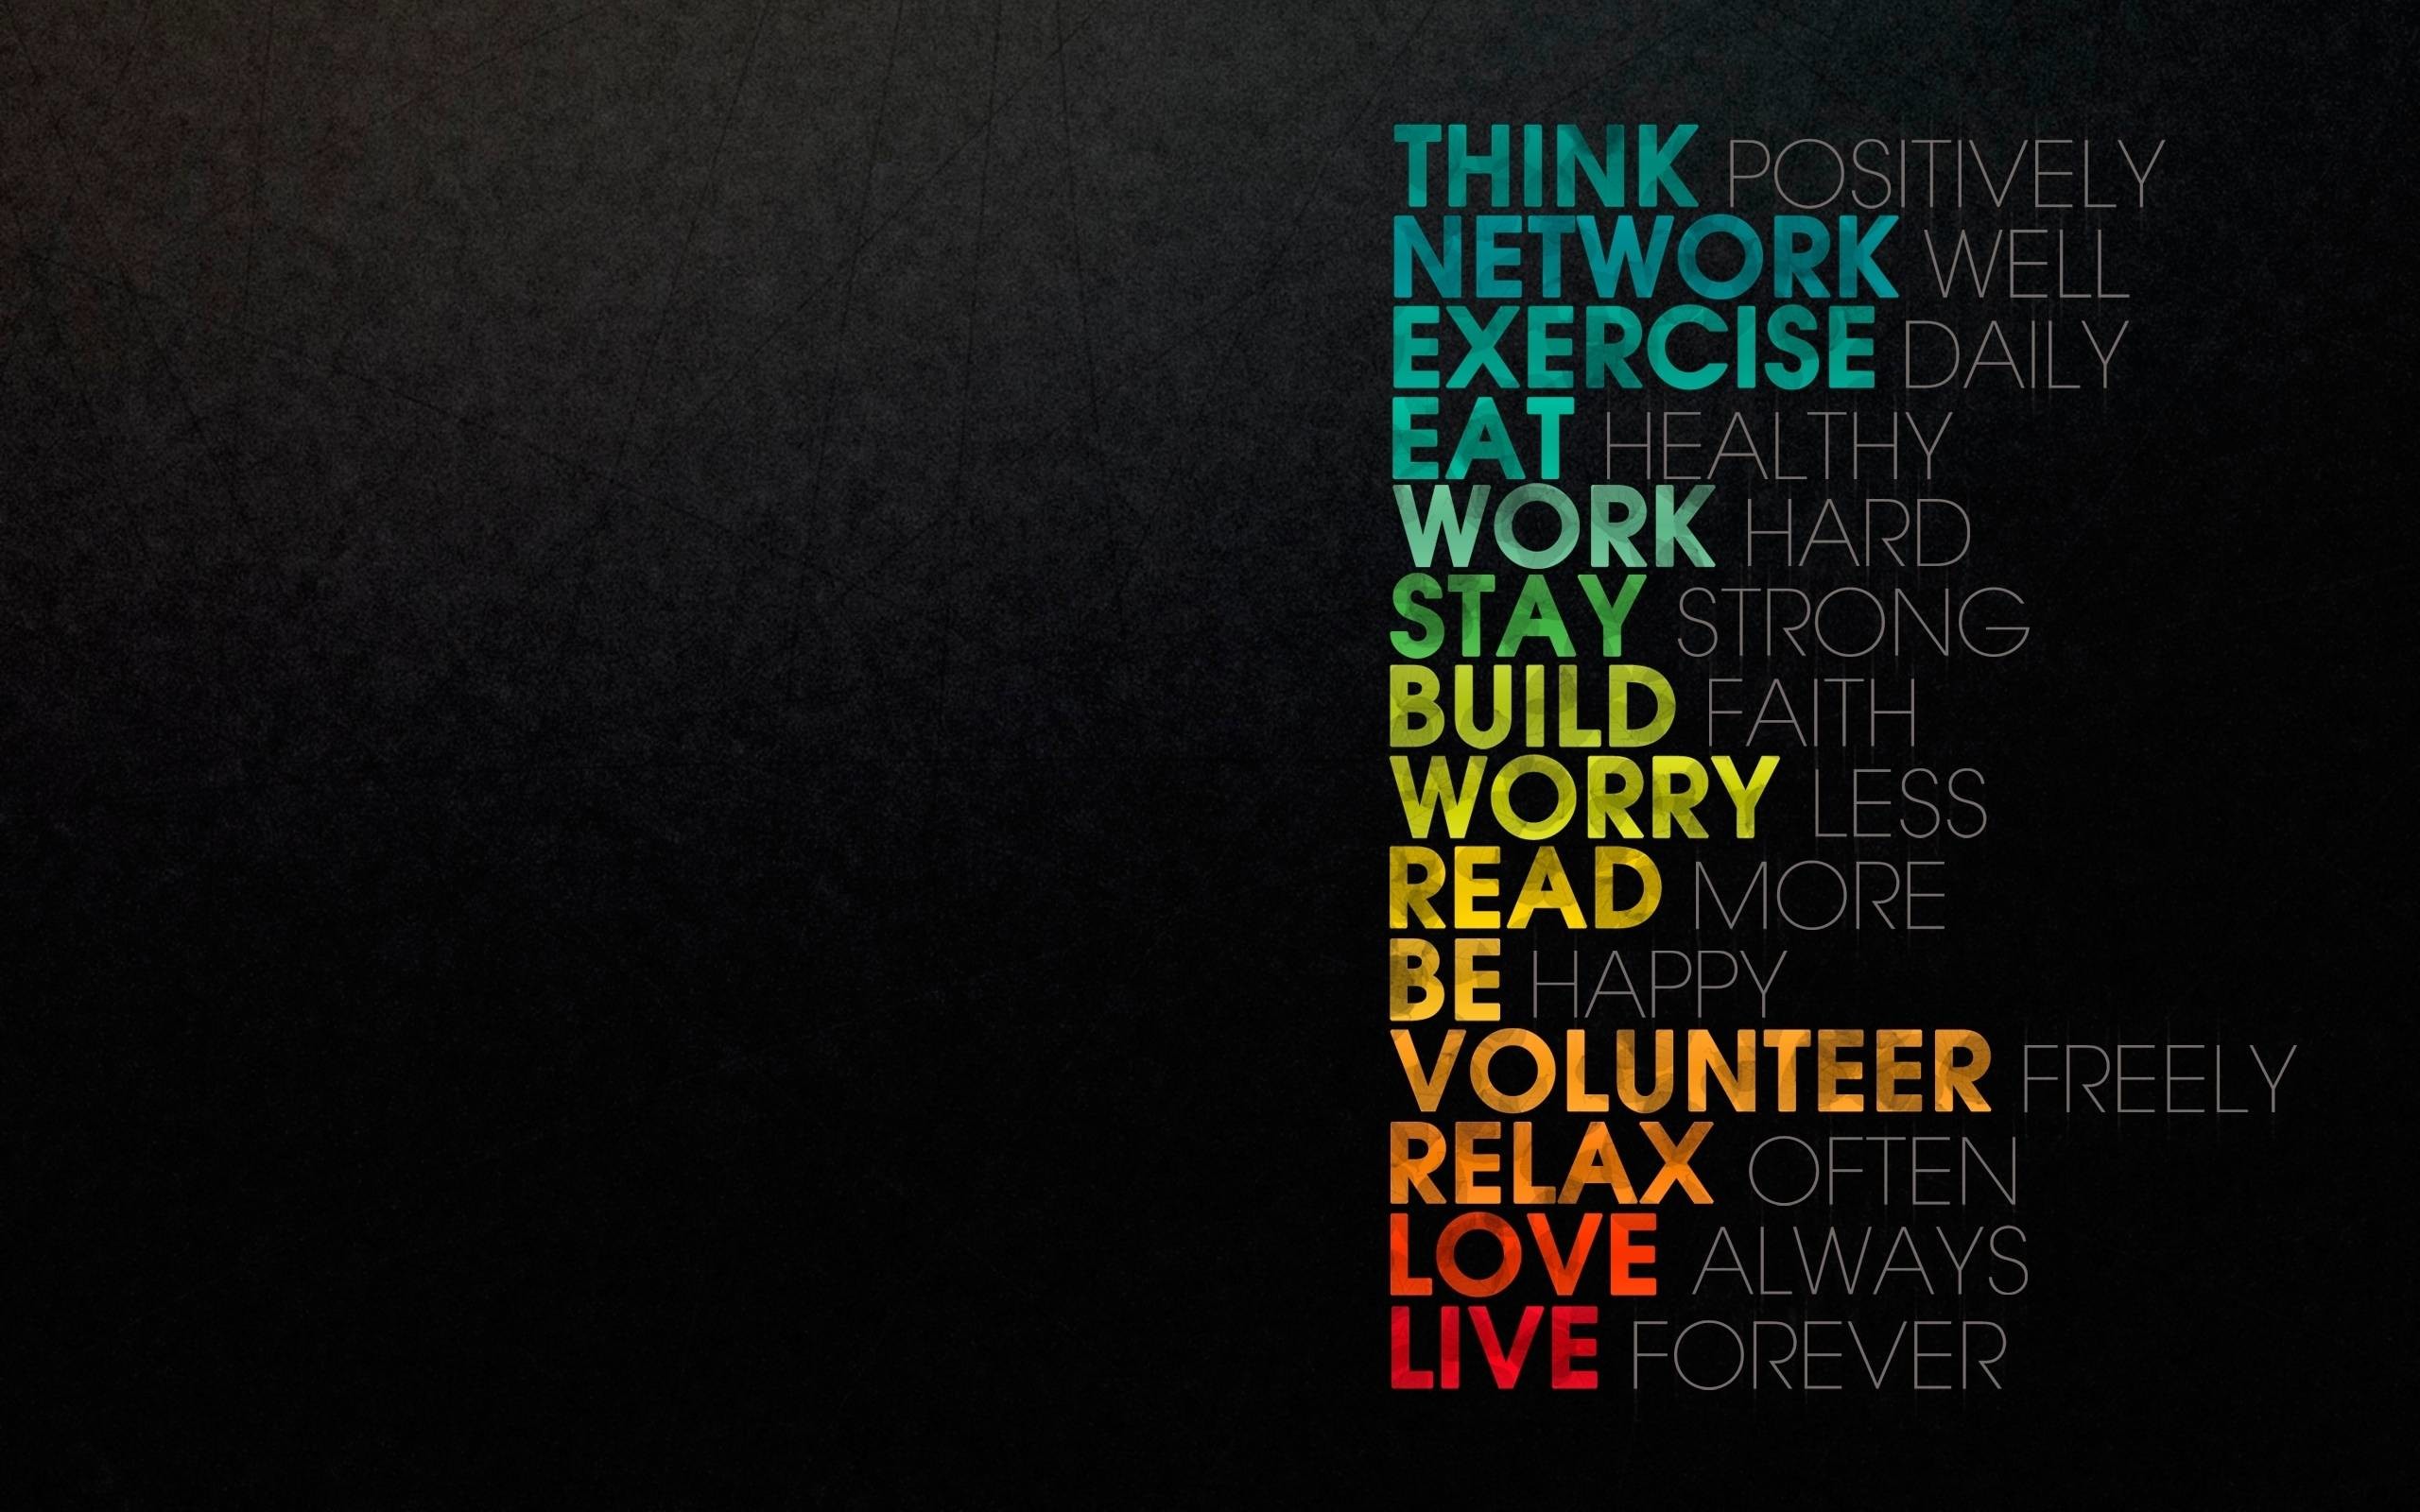 2560x1600 56 Free Motivational Wallpapers For Download That Will Make Your Day